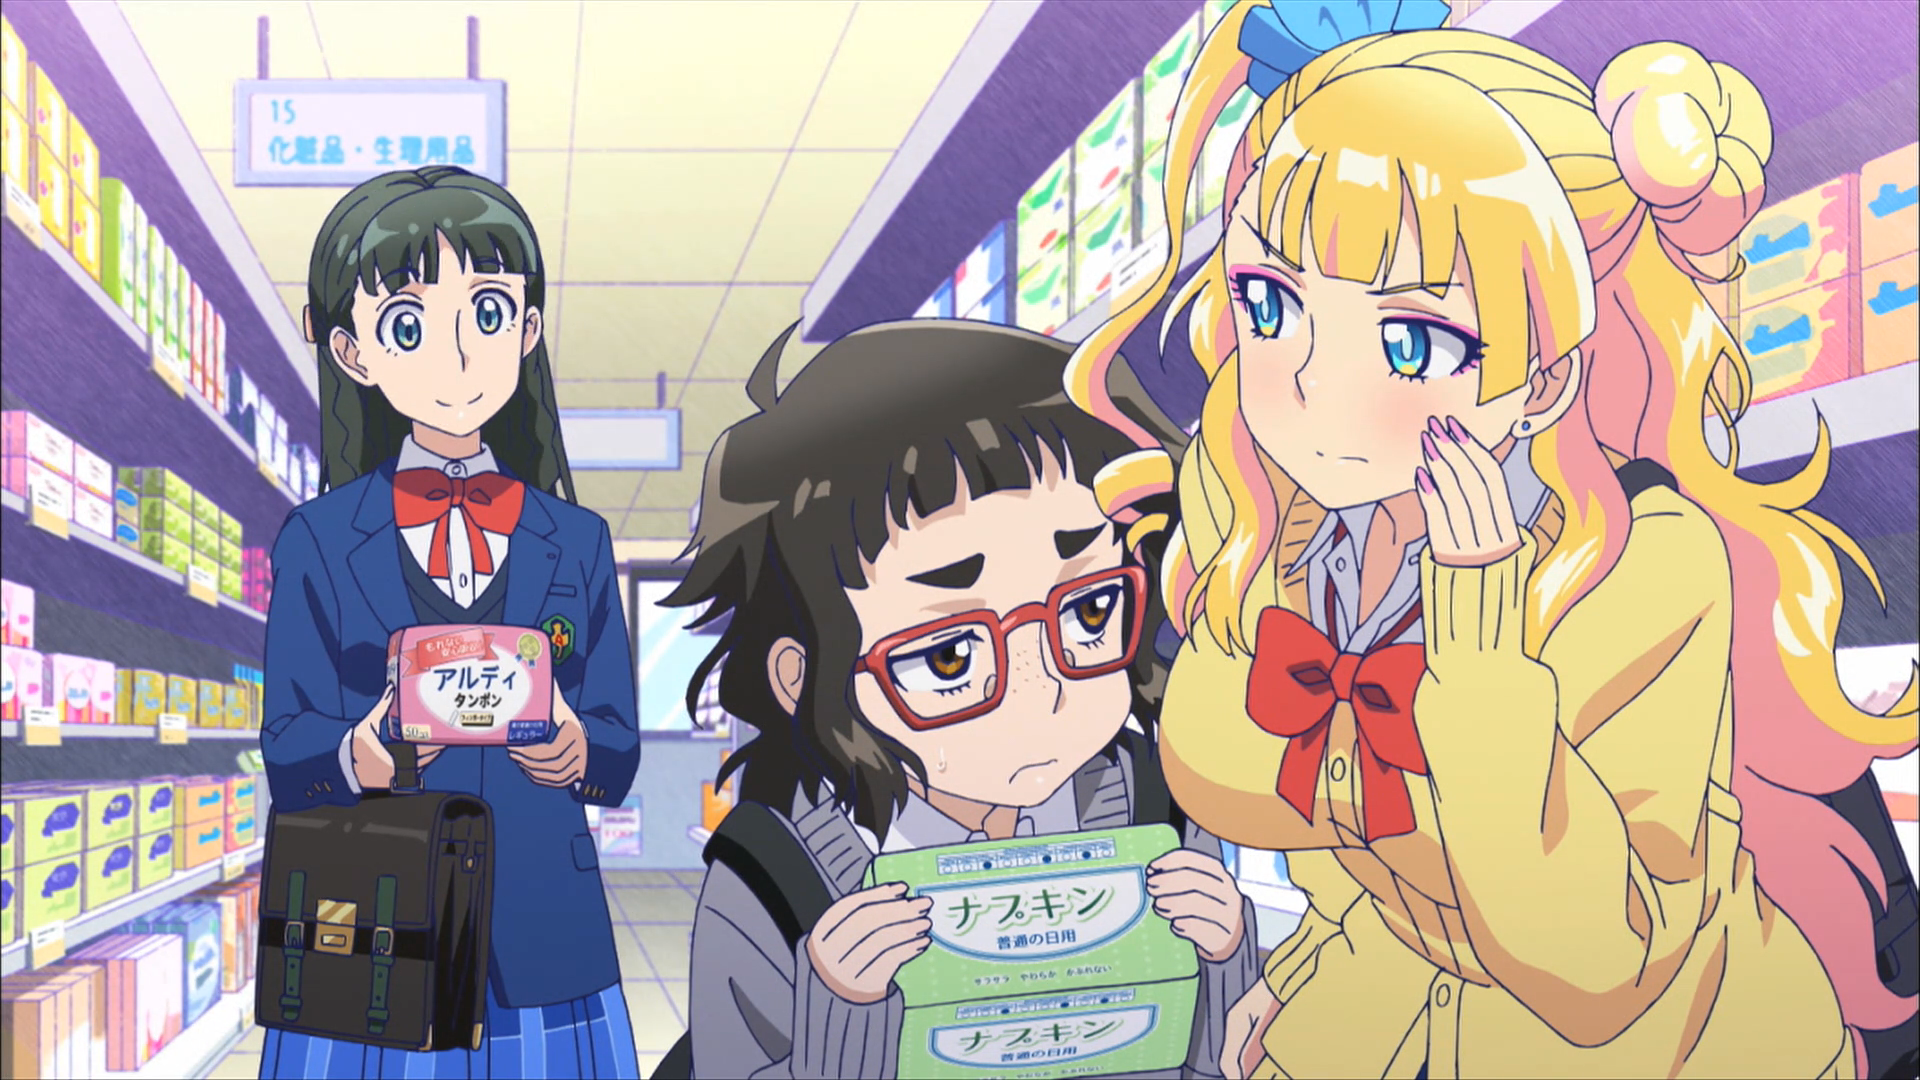 Galko-chan from Please Tell Me! Galko-Chan